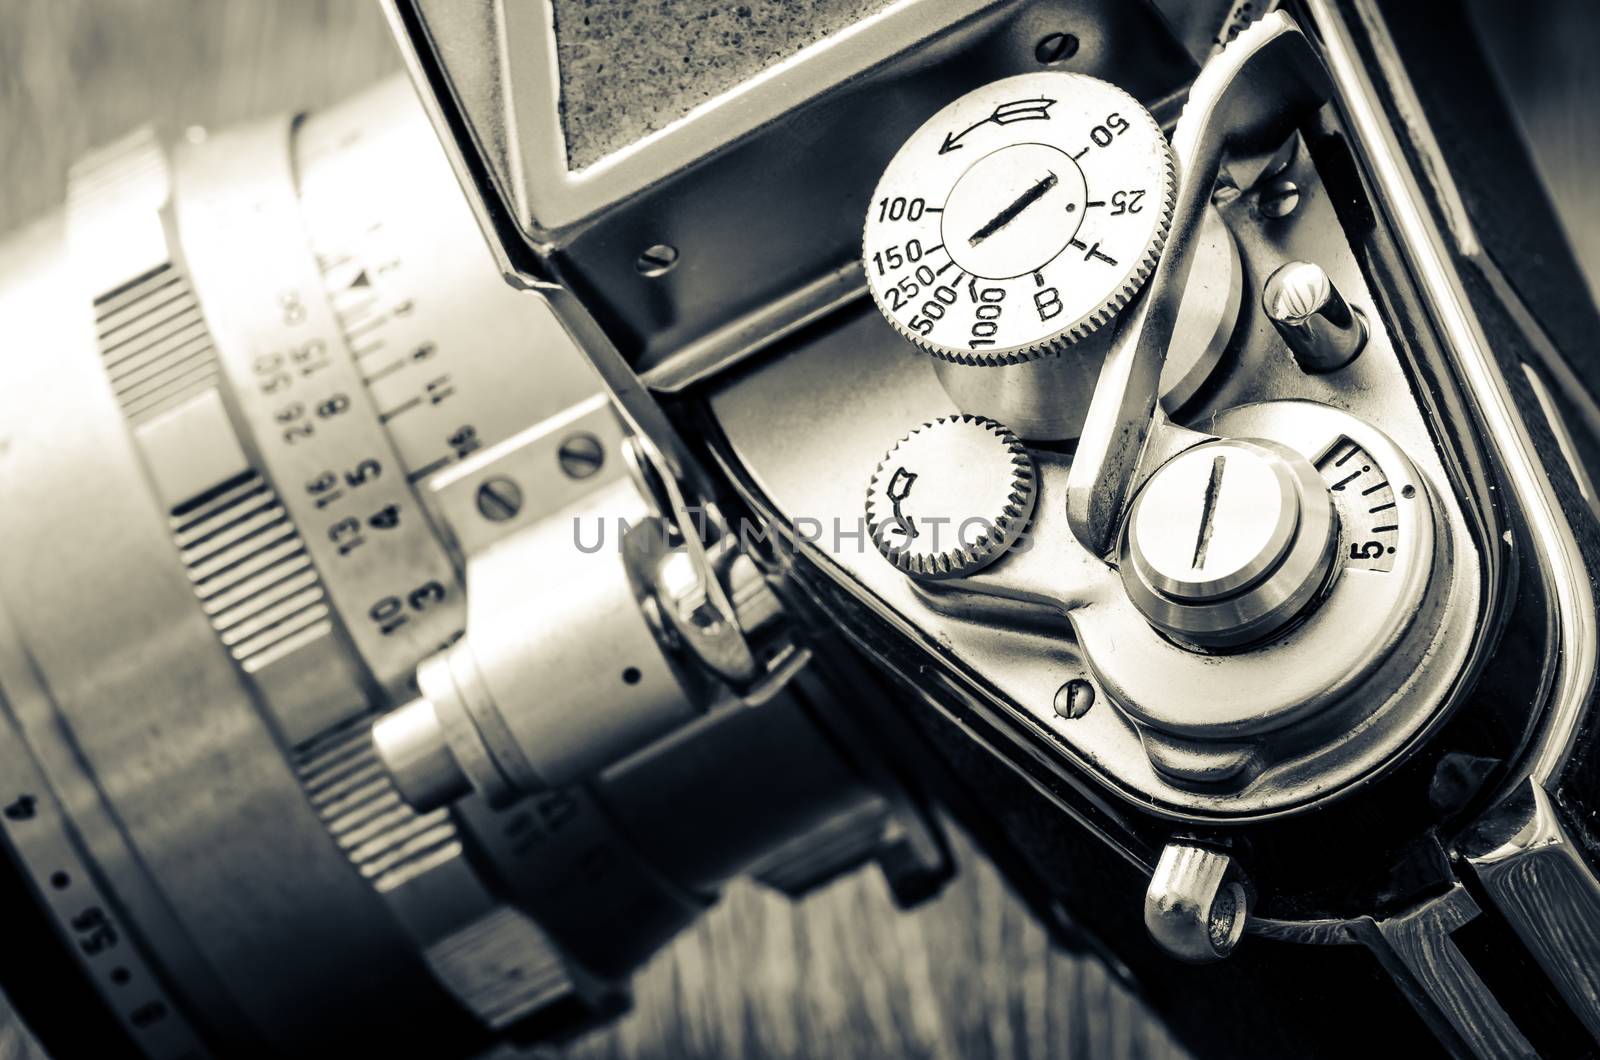 Detail of old classic camera dials in vintage style by martinm303